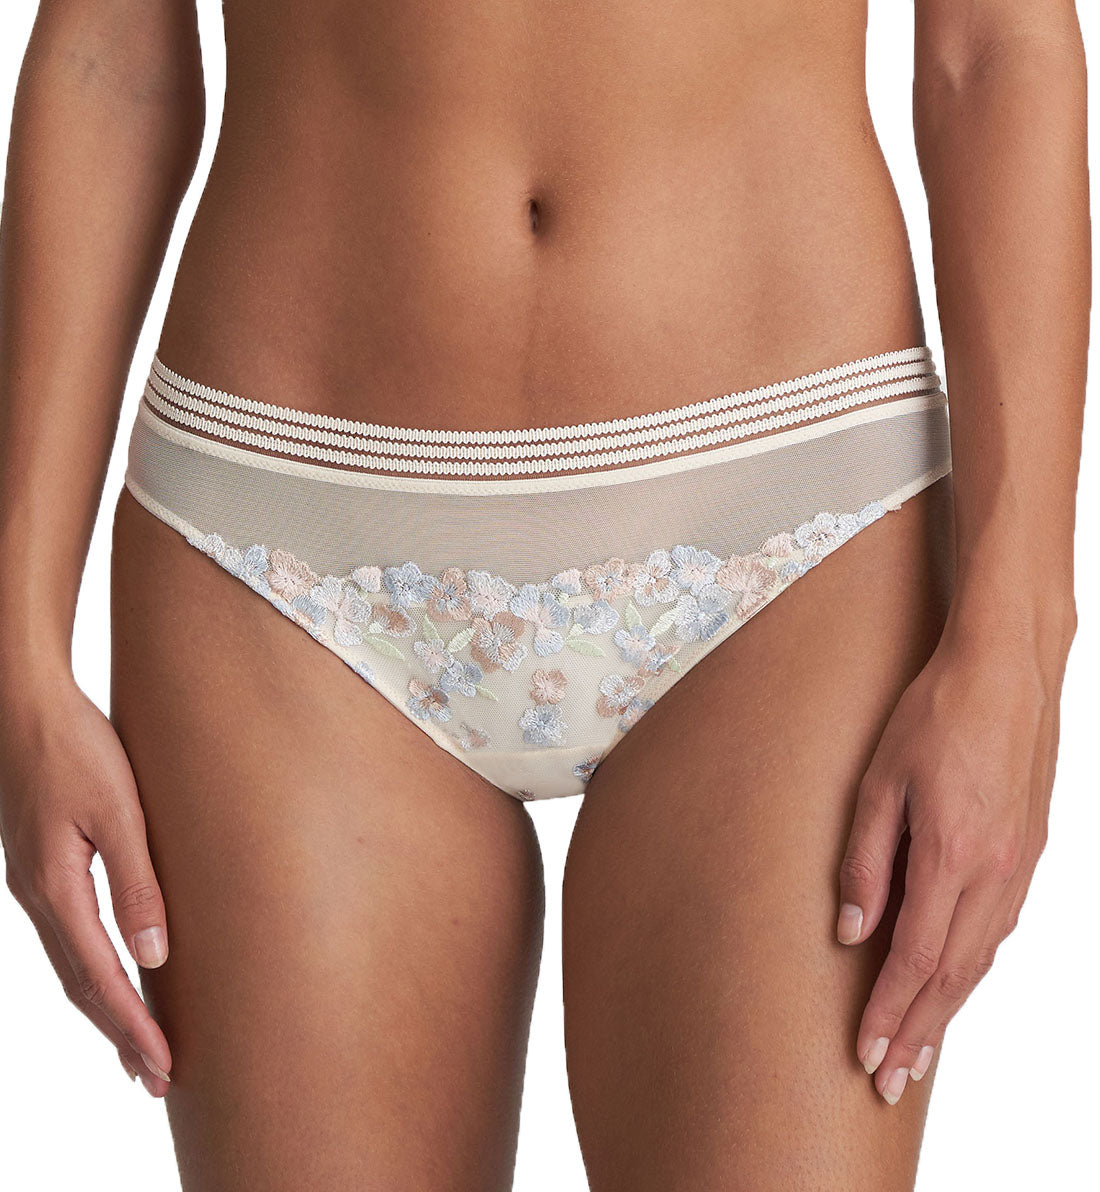 Marie Jo Nathy Matching Rio Brief (0502480),XXL,Pearled Ivory - Pearled Ivory,XXL